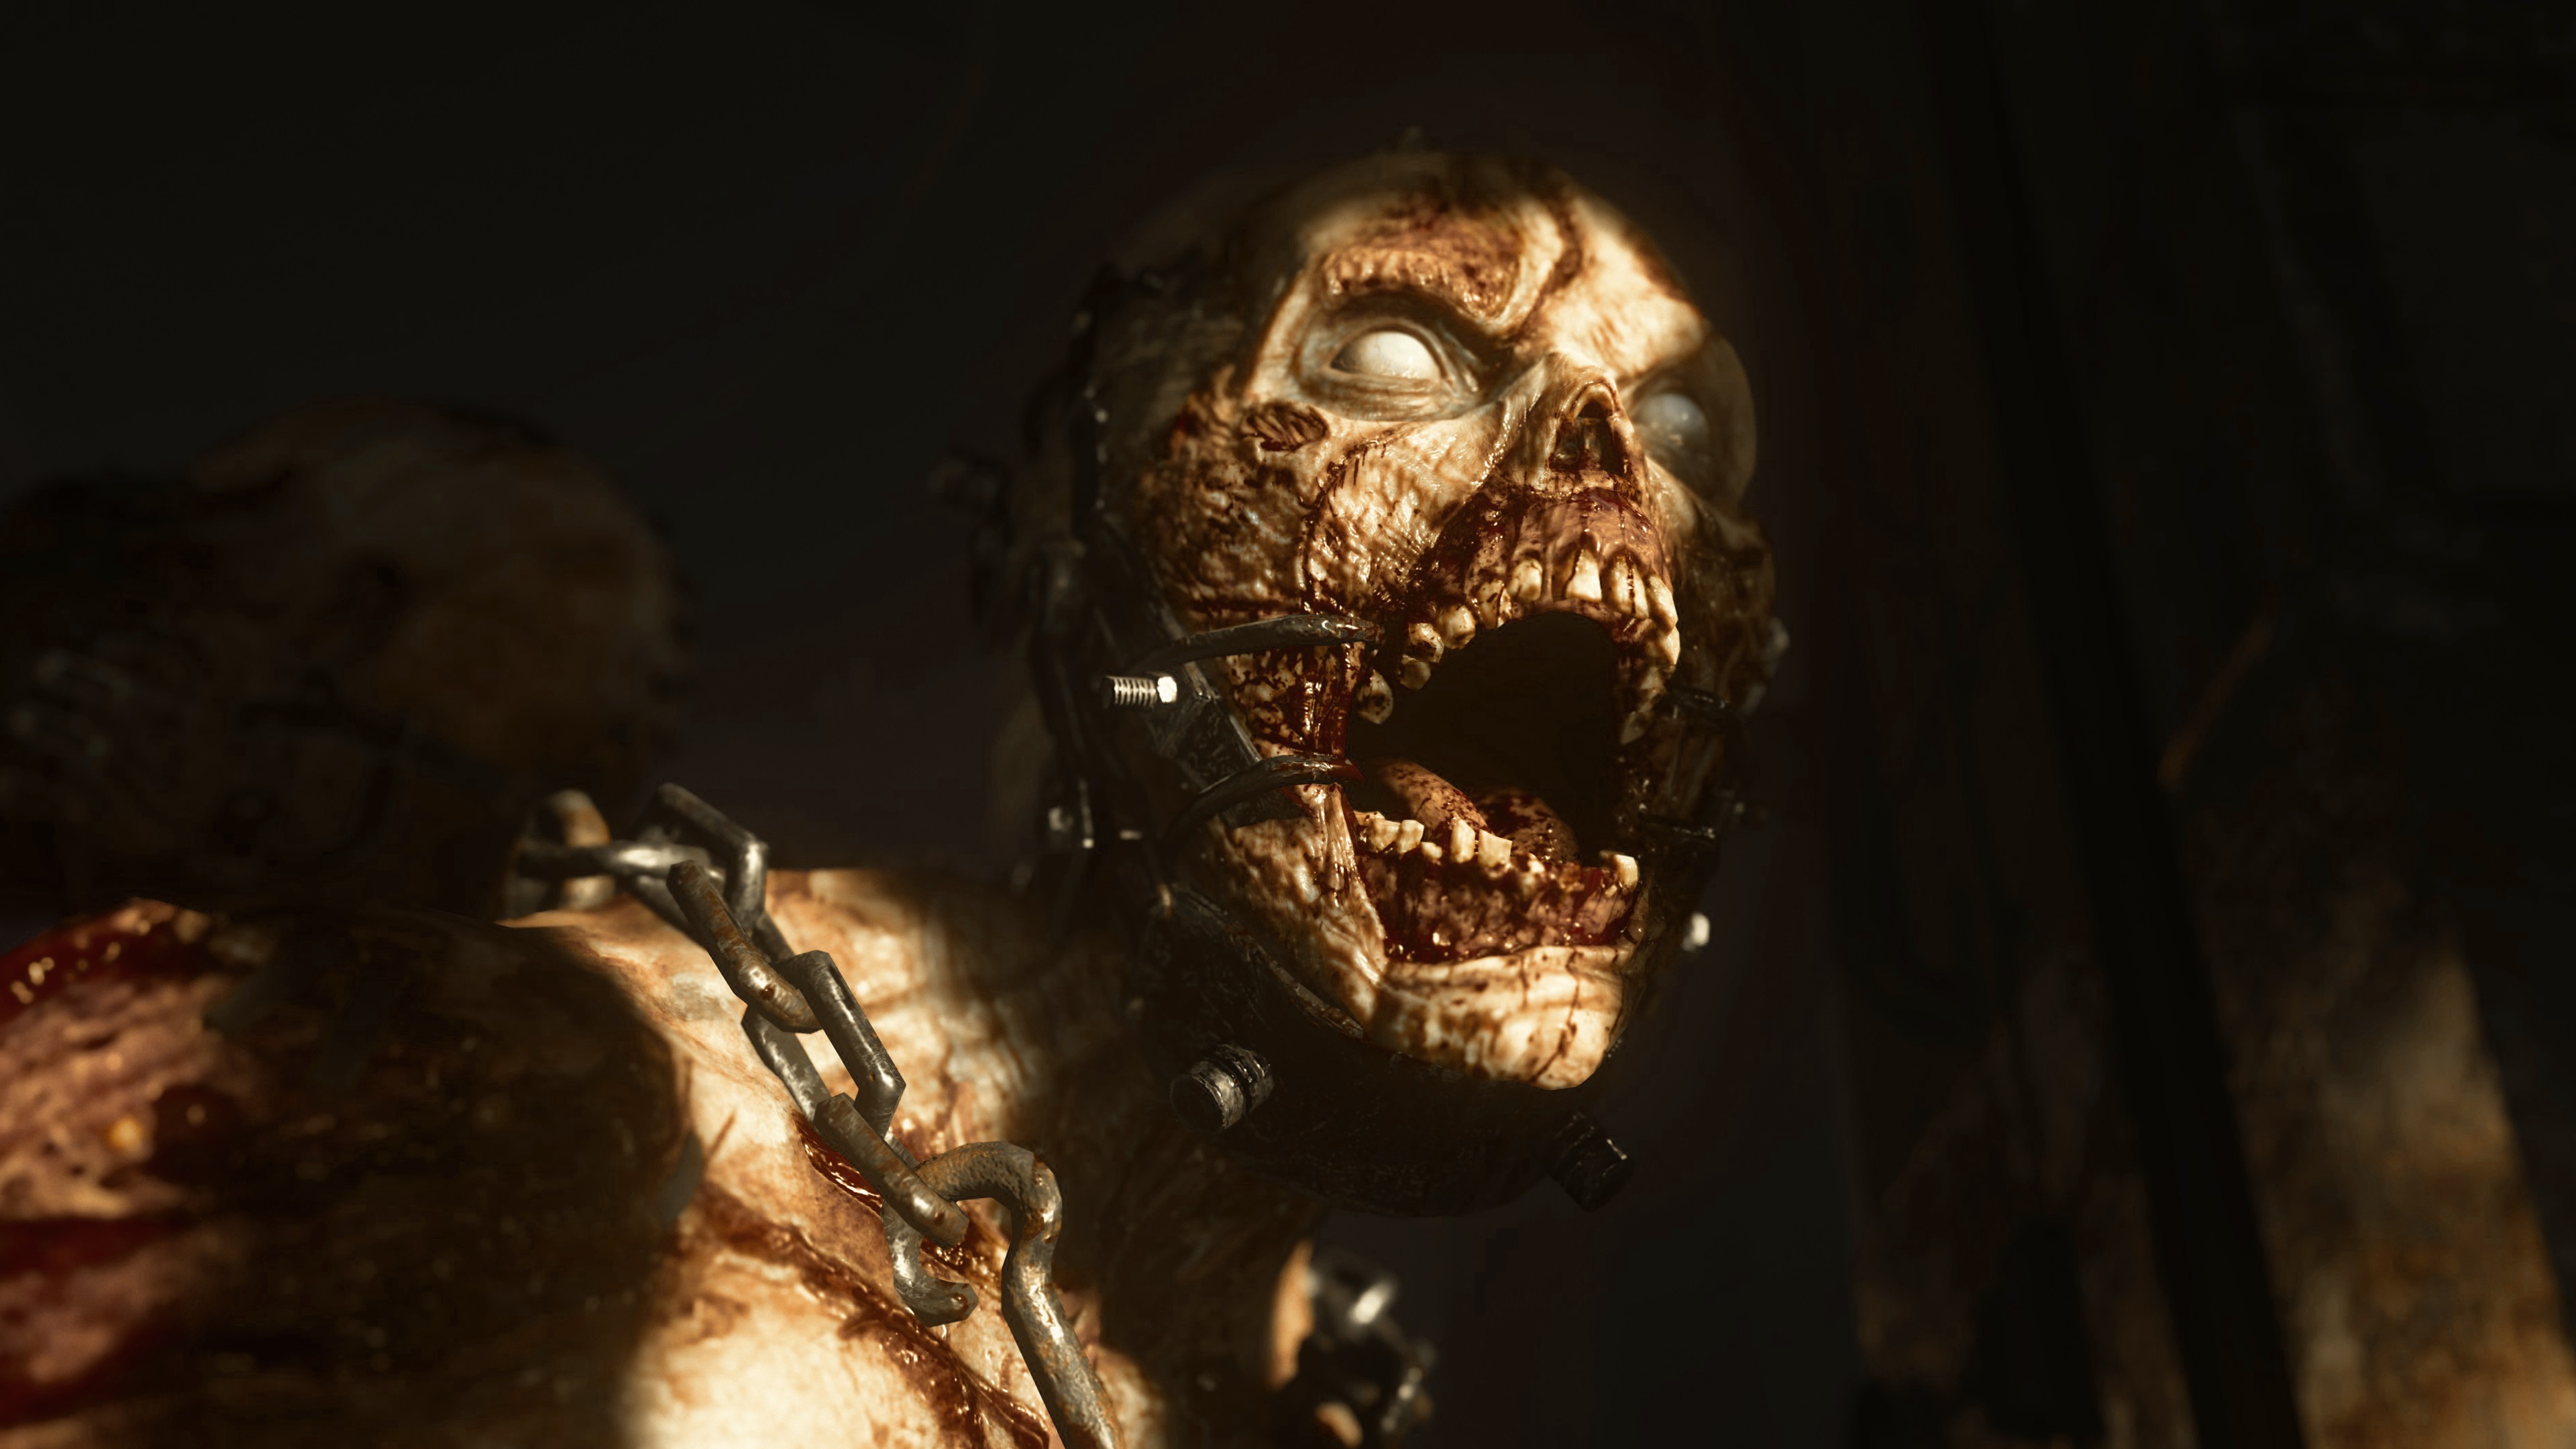 Call of Duty: Vanguard will have a Zombies mode, made by Treyarch - Polygon